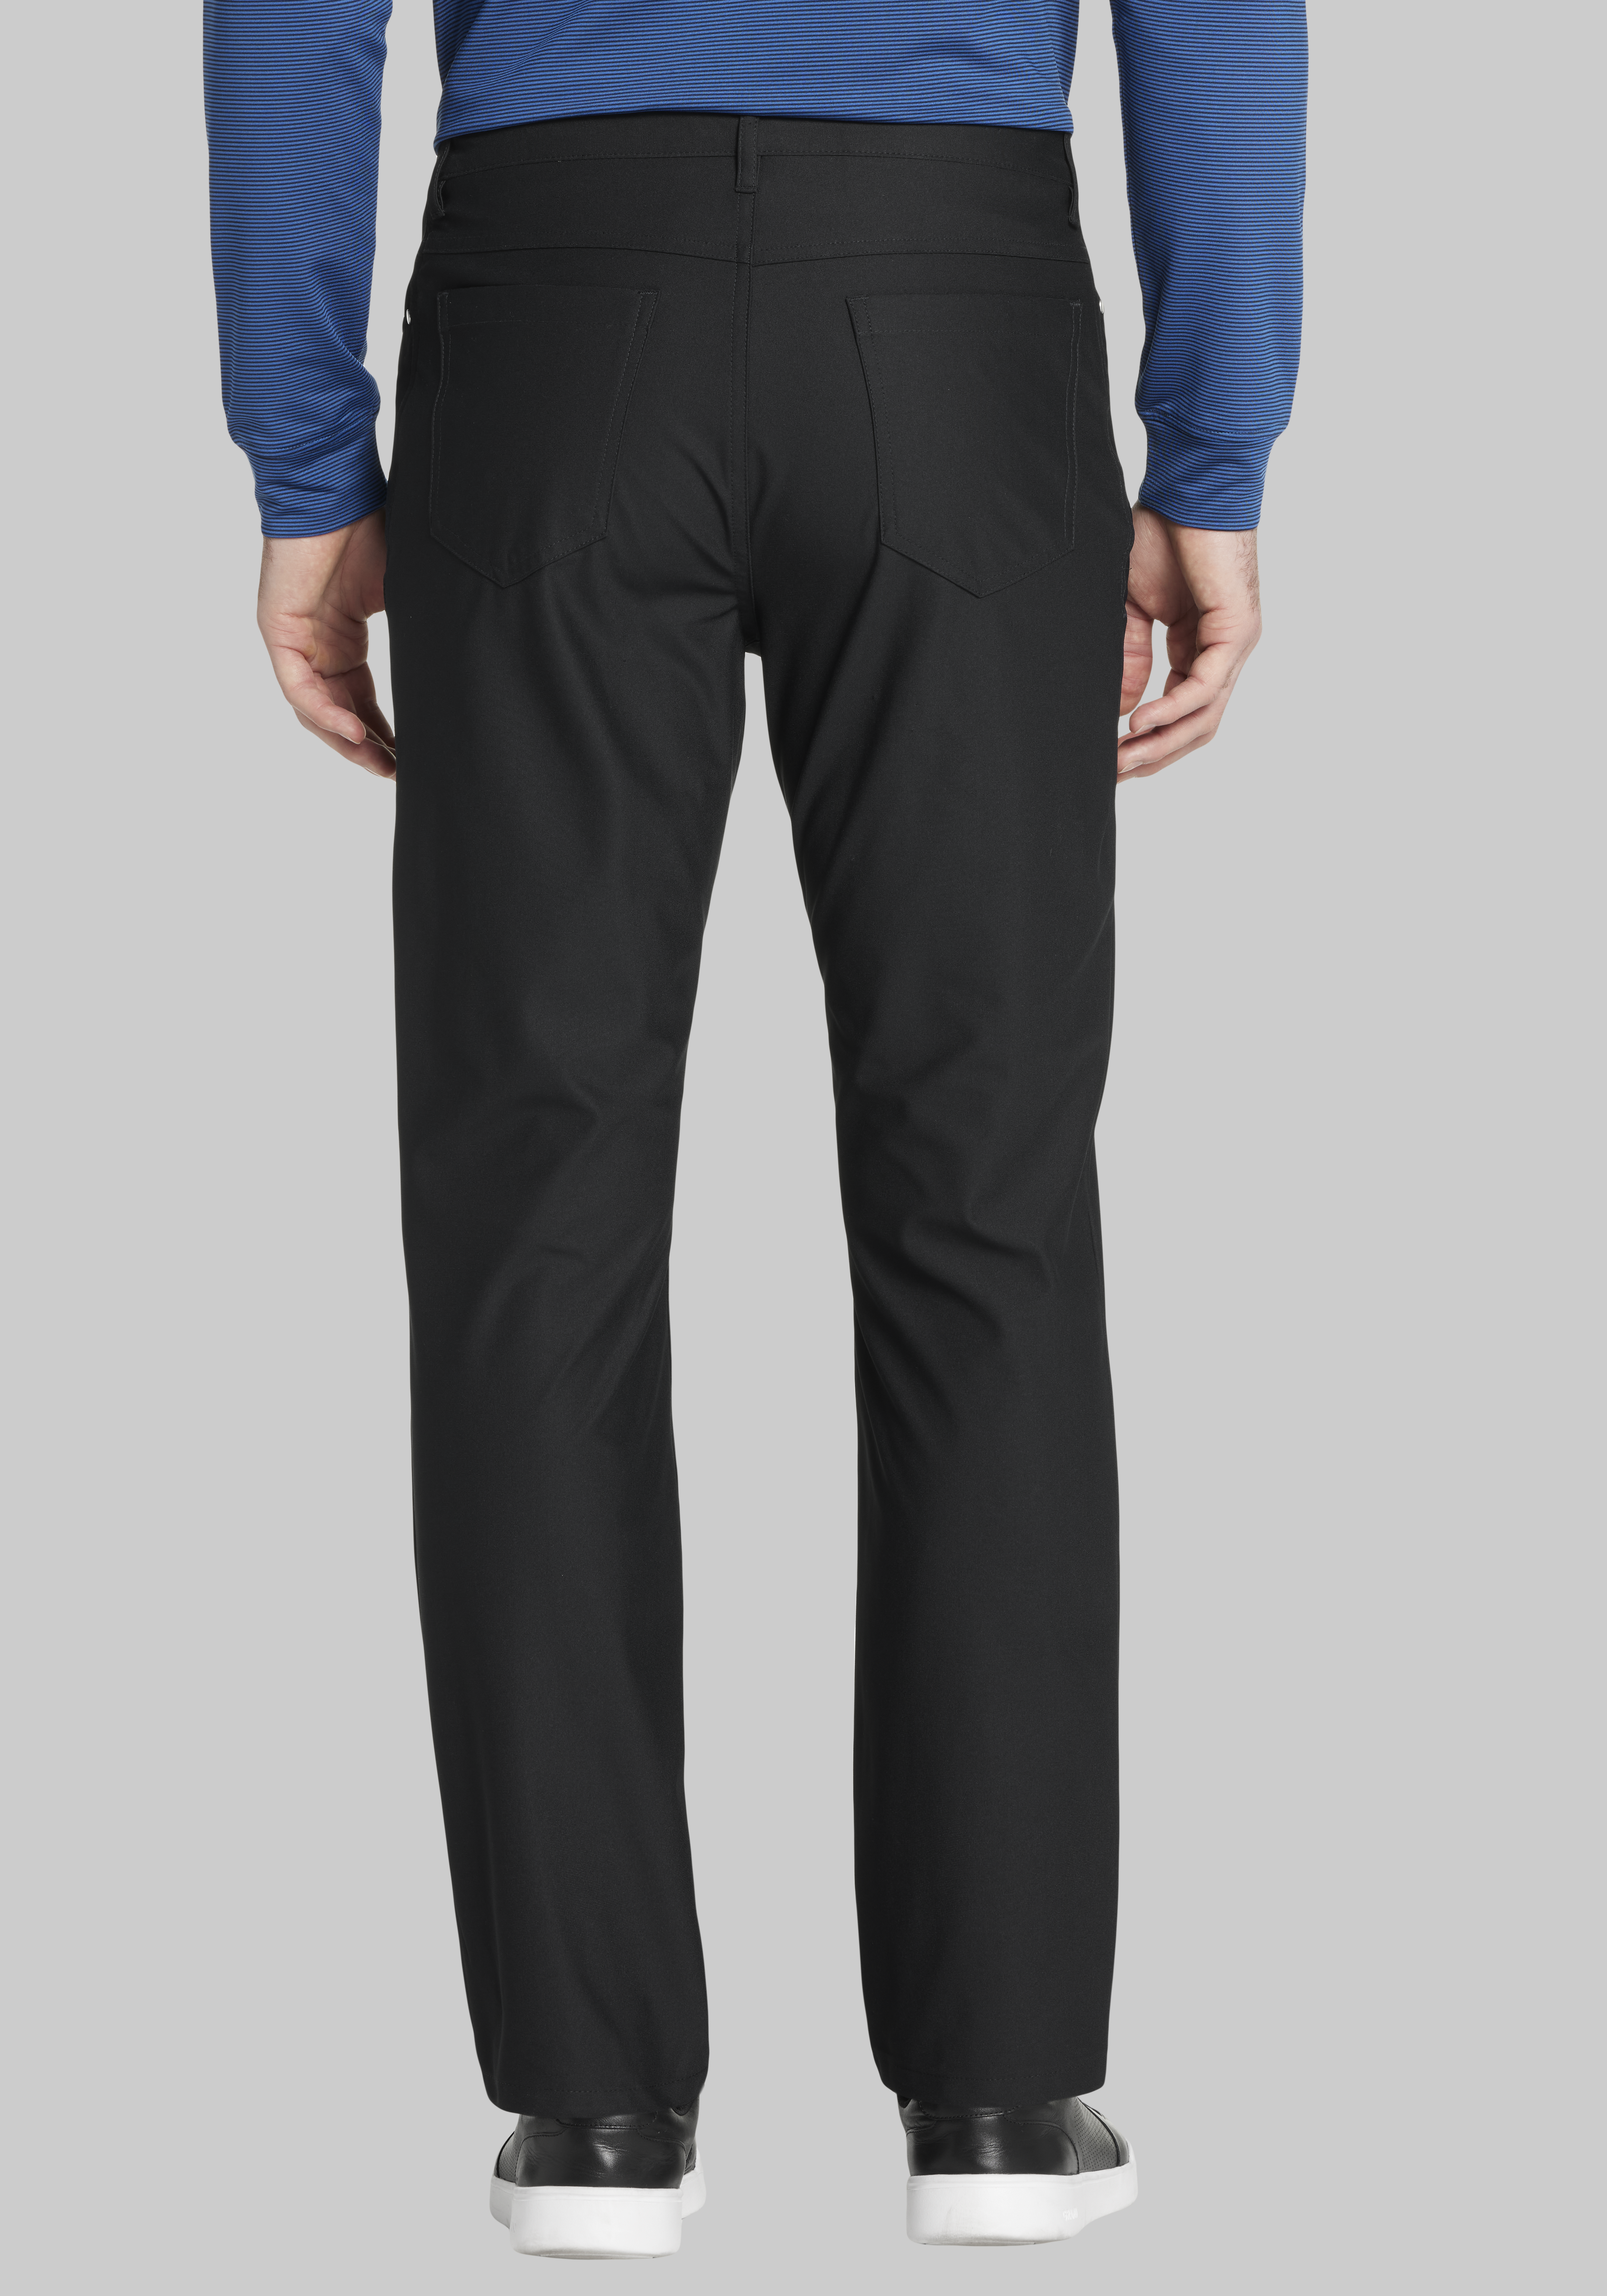 Traveler Collection Slim Fit Ultimate Active Pants CLEARANCE